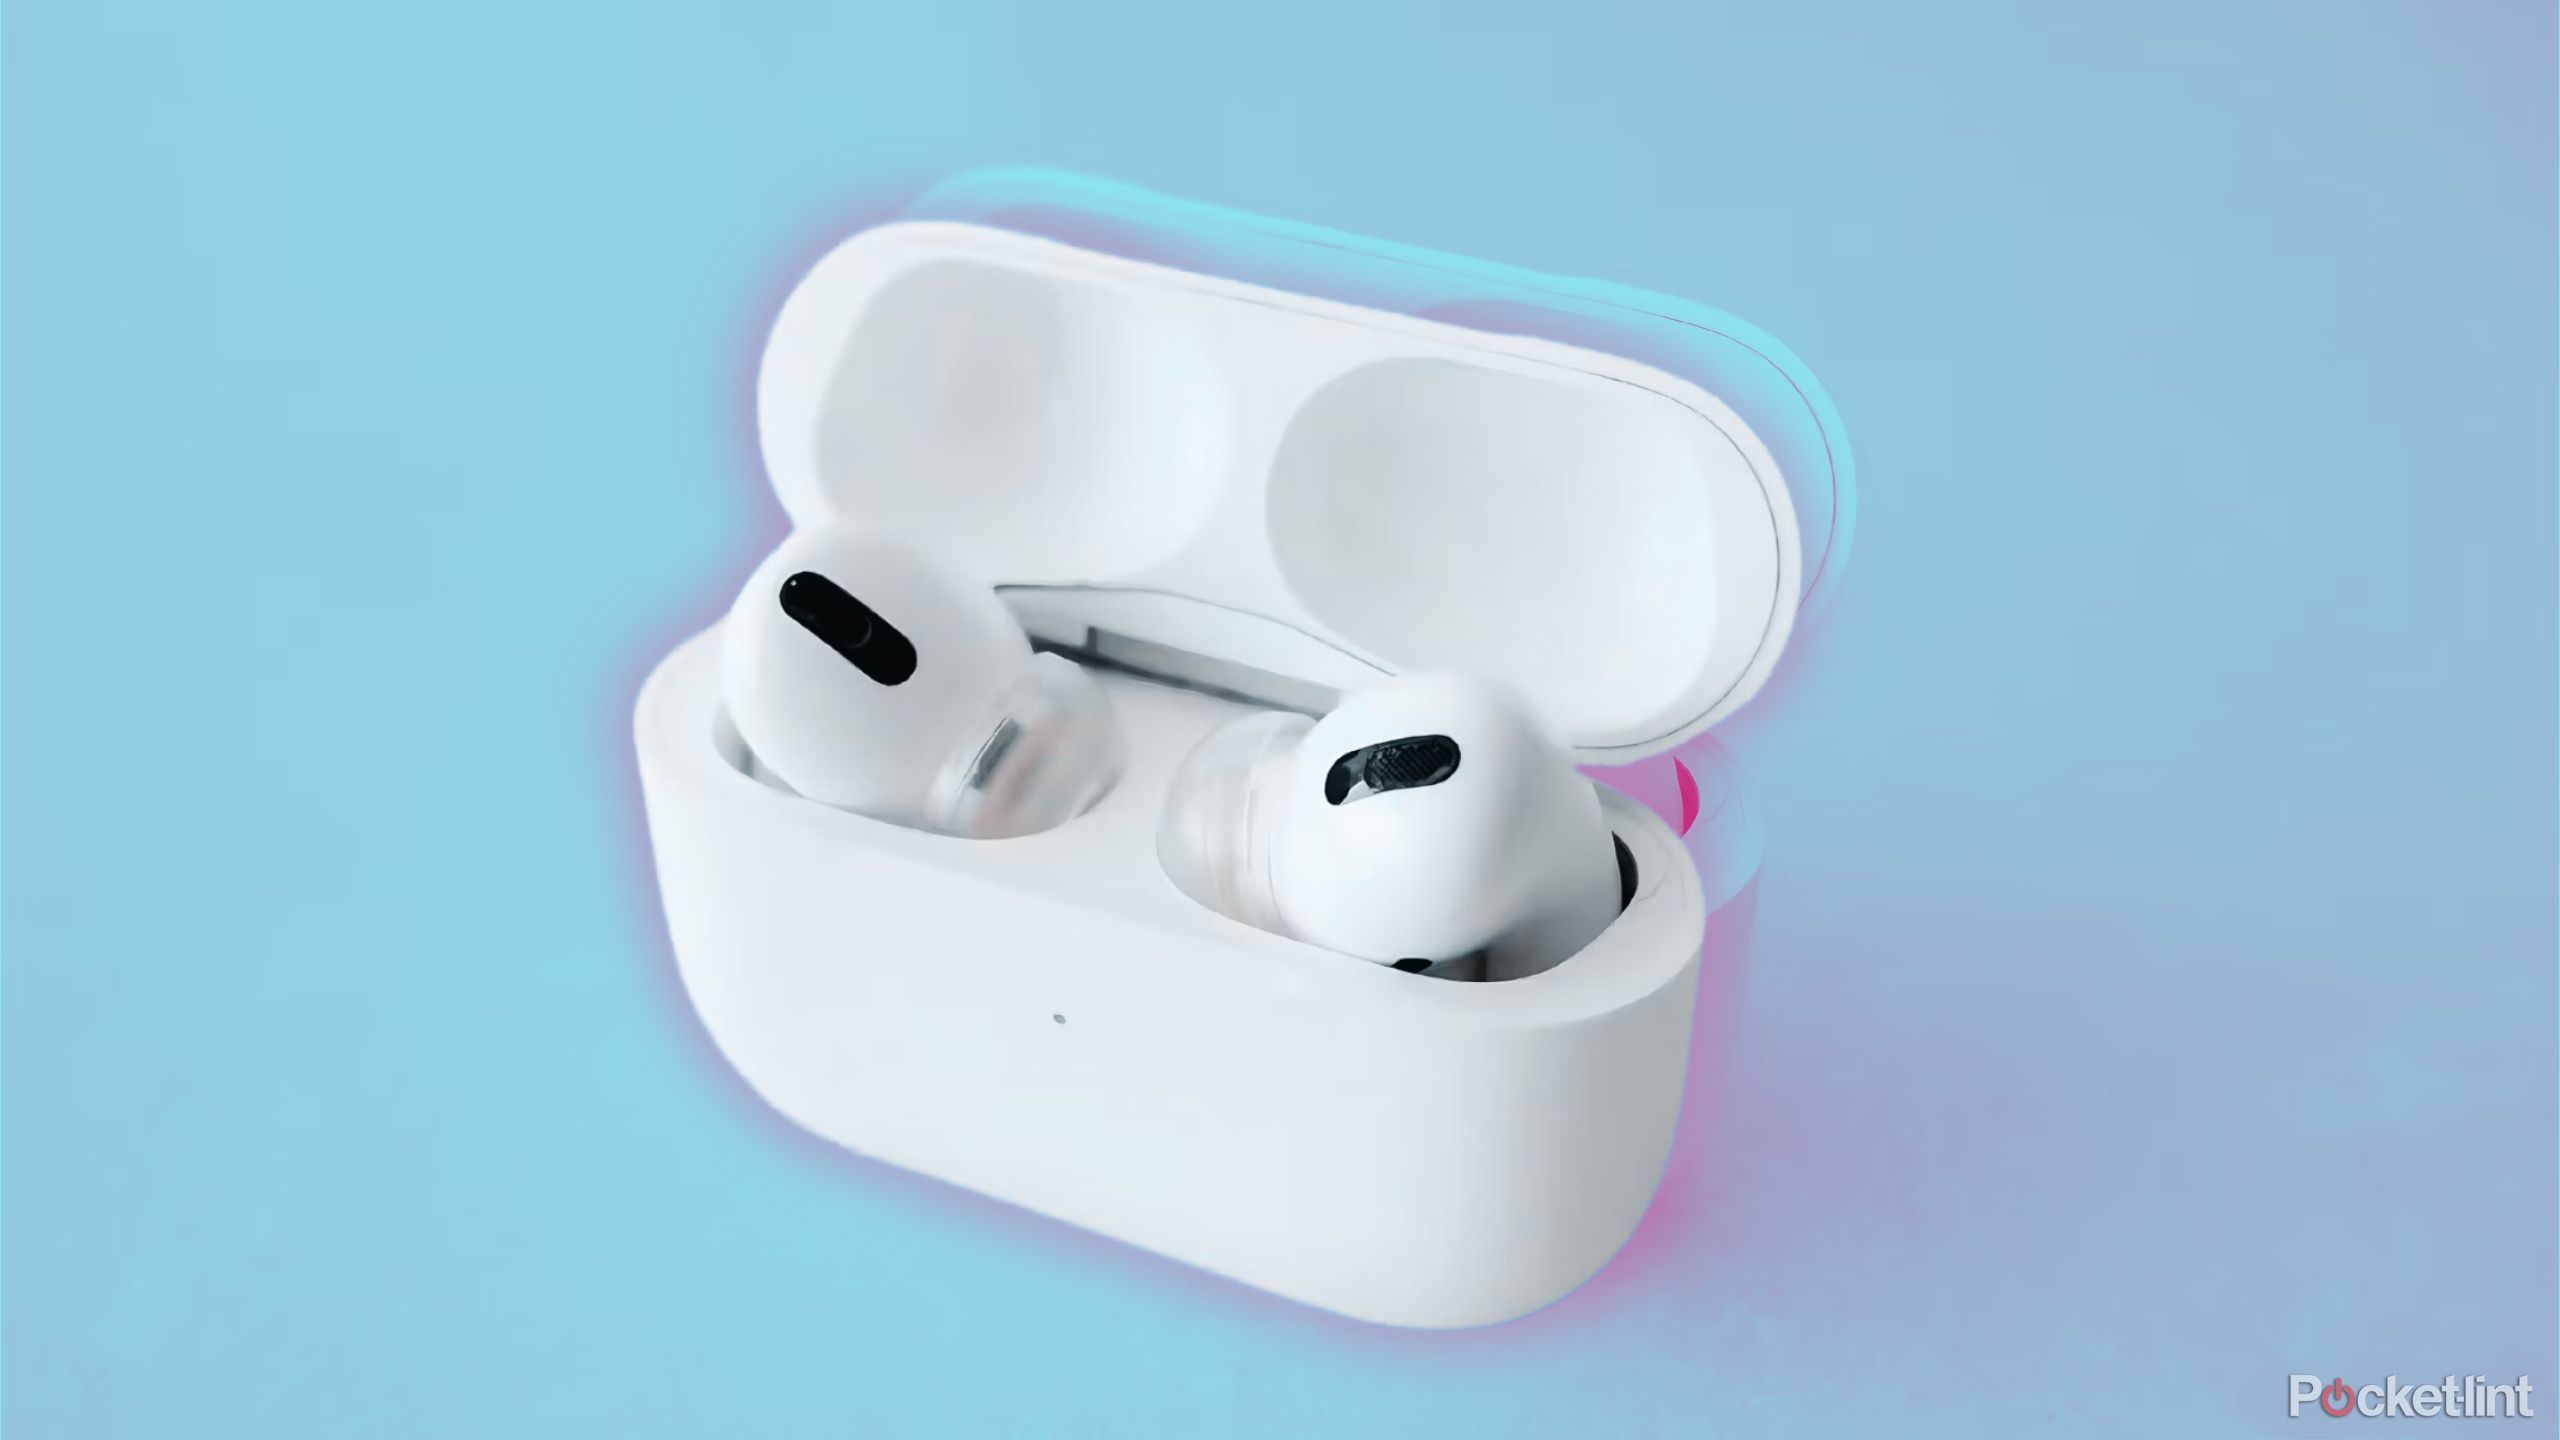 AirPods Pro in case against a blue background